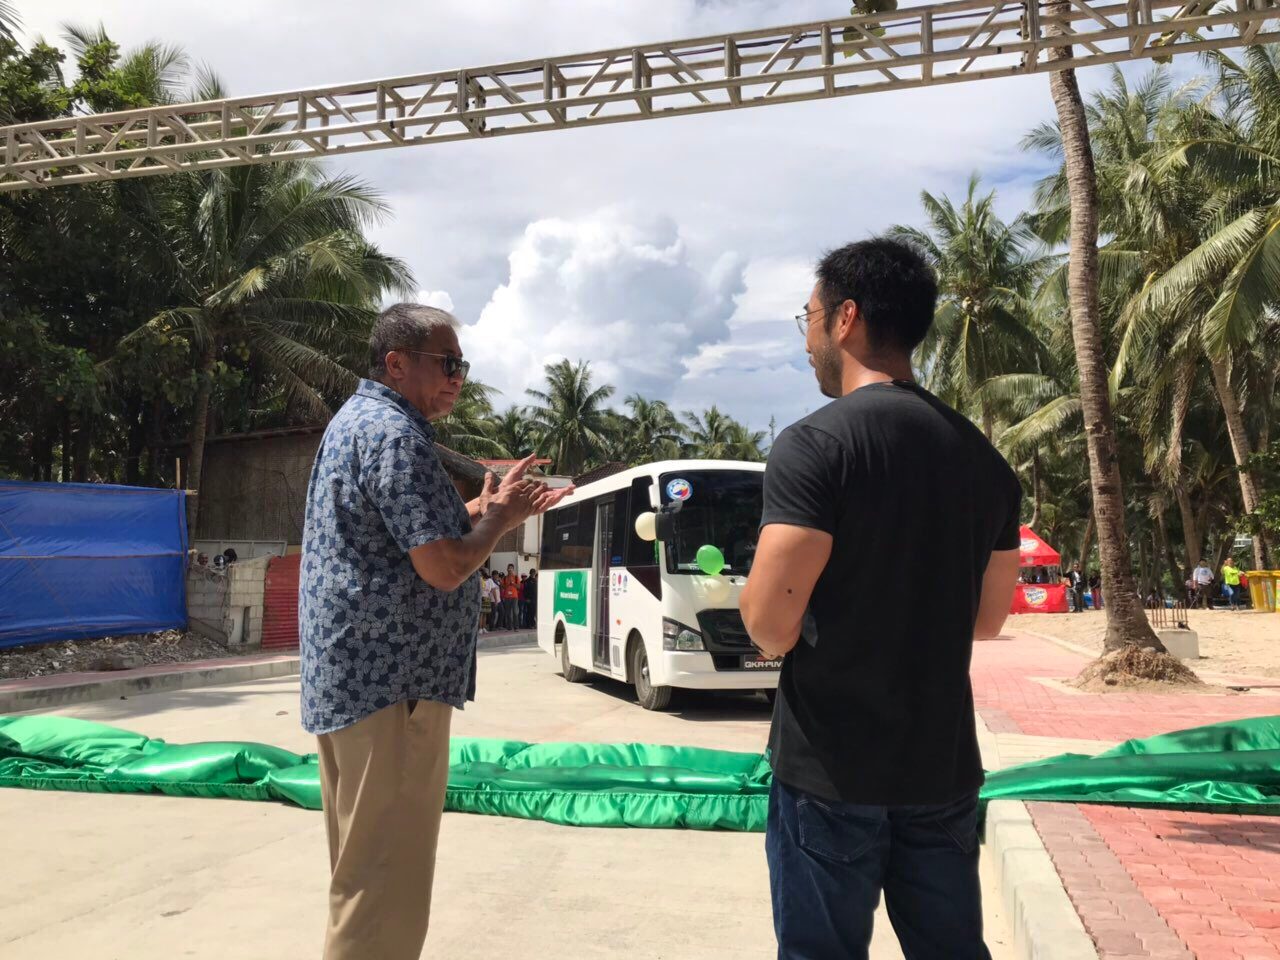 HOP-ON, HOP-OFF. Transportation Secretary Arthur Tugade and Grab Philippines head Brian Cu unveil the new hop-on, hop-off bus in Boracay. 